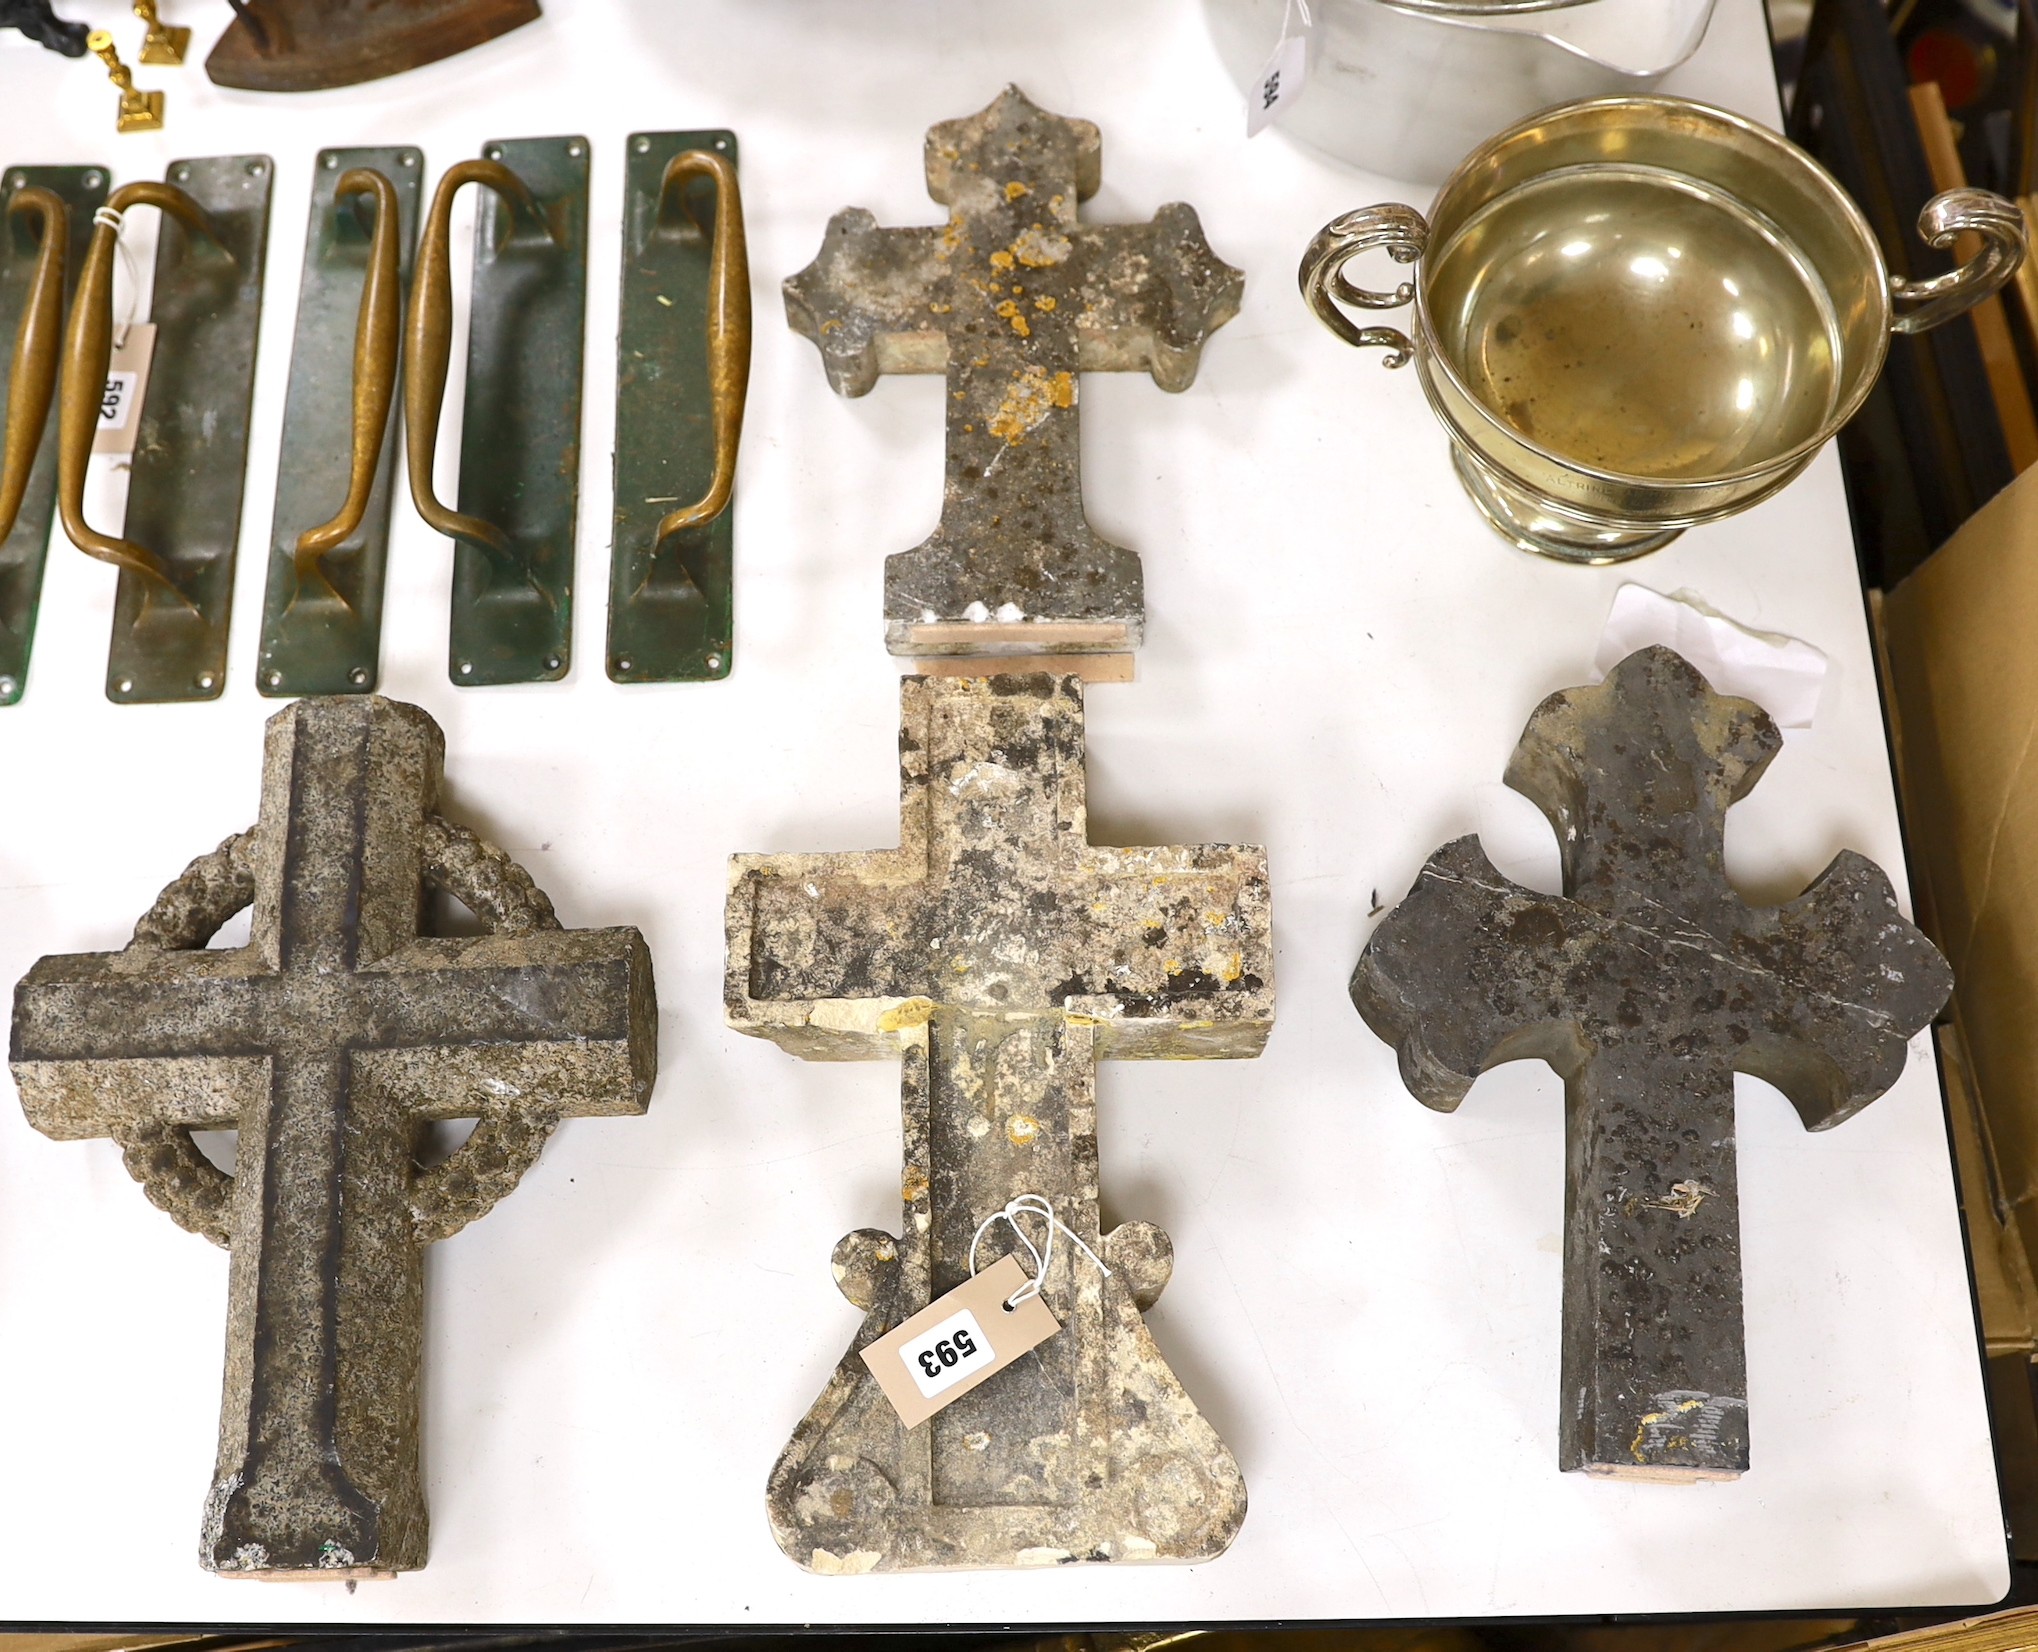 Four 19th century French stone crosses, largest 36cm tall                                                                                                                                                                   